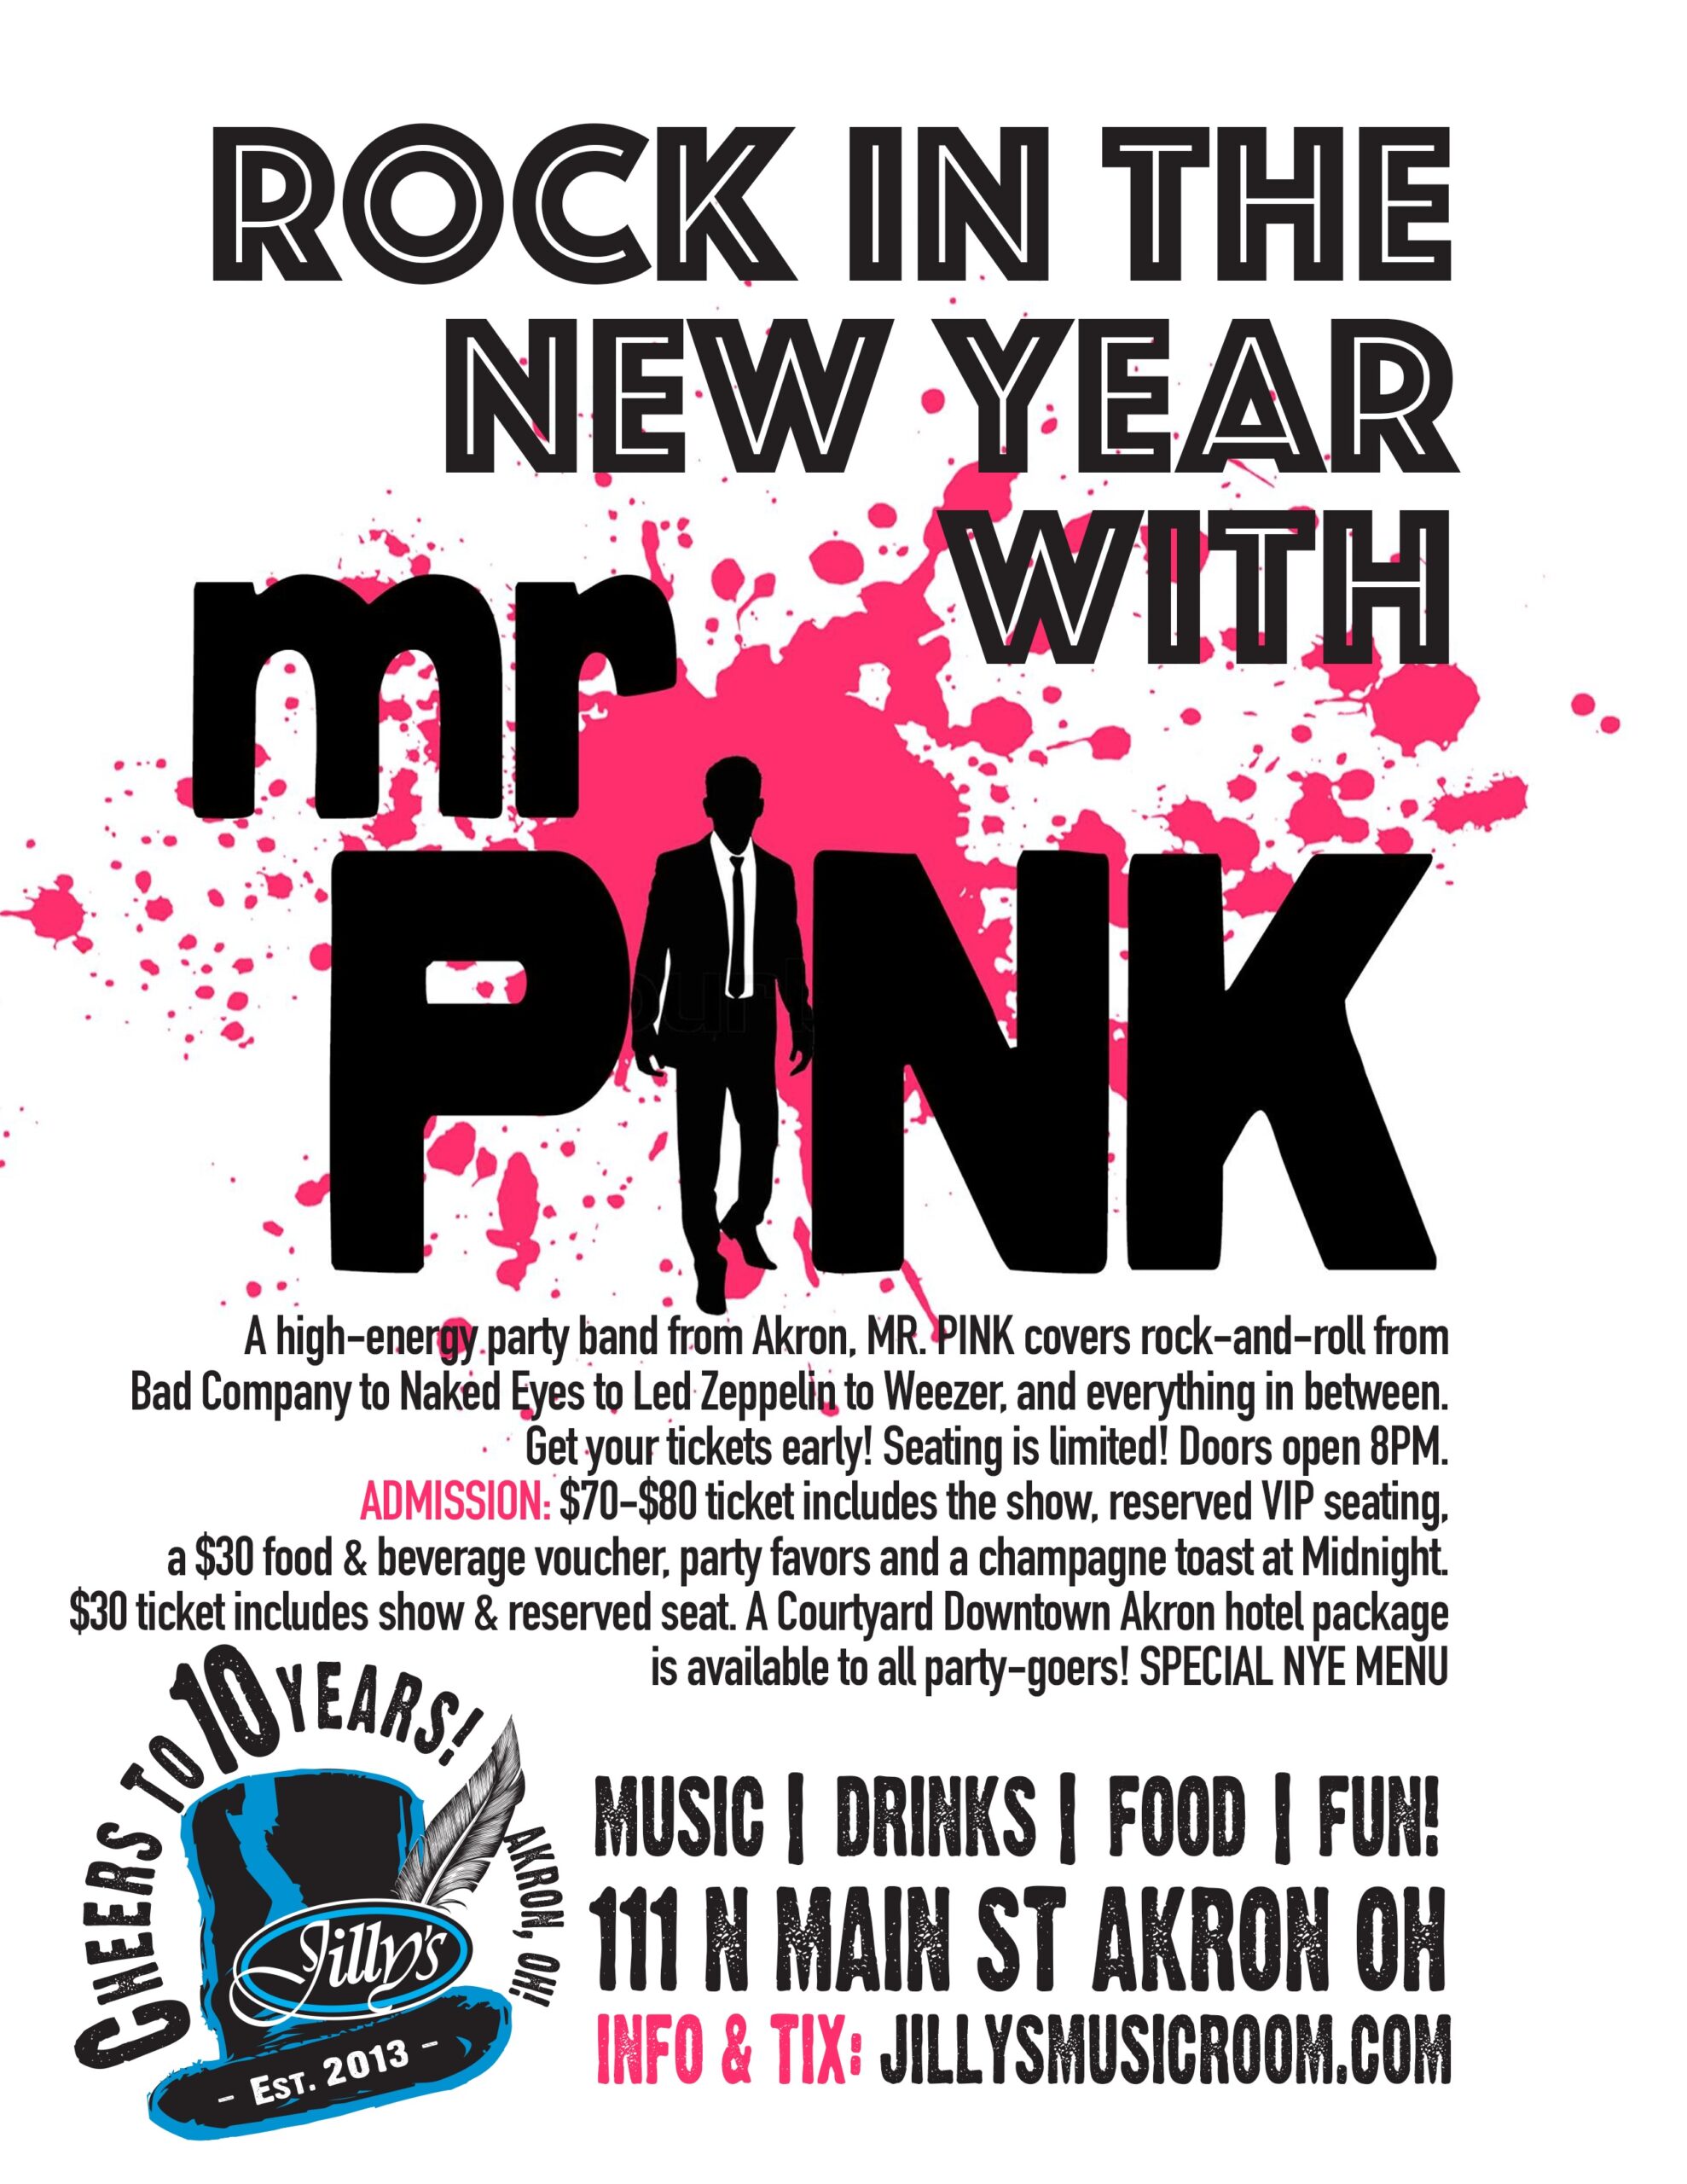 Mr. Pink - All infos about this